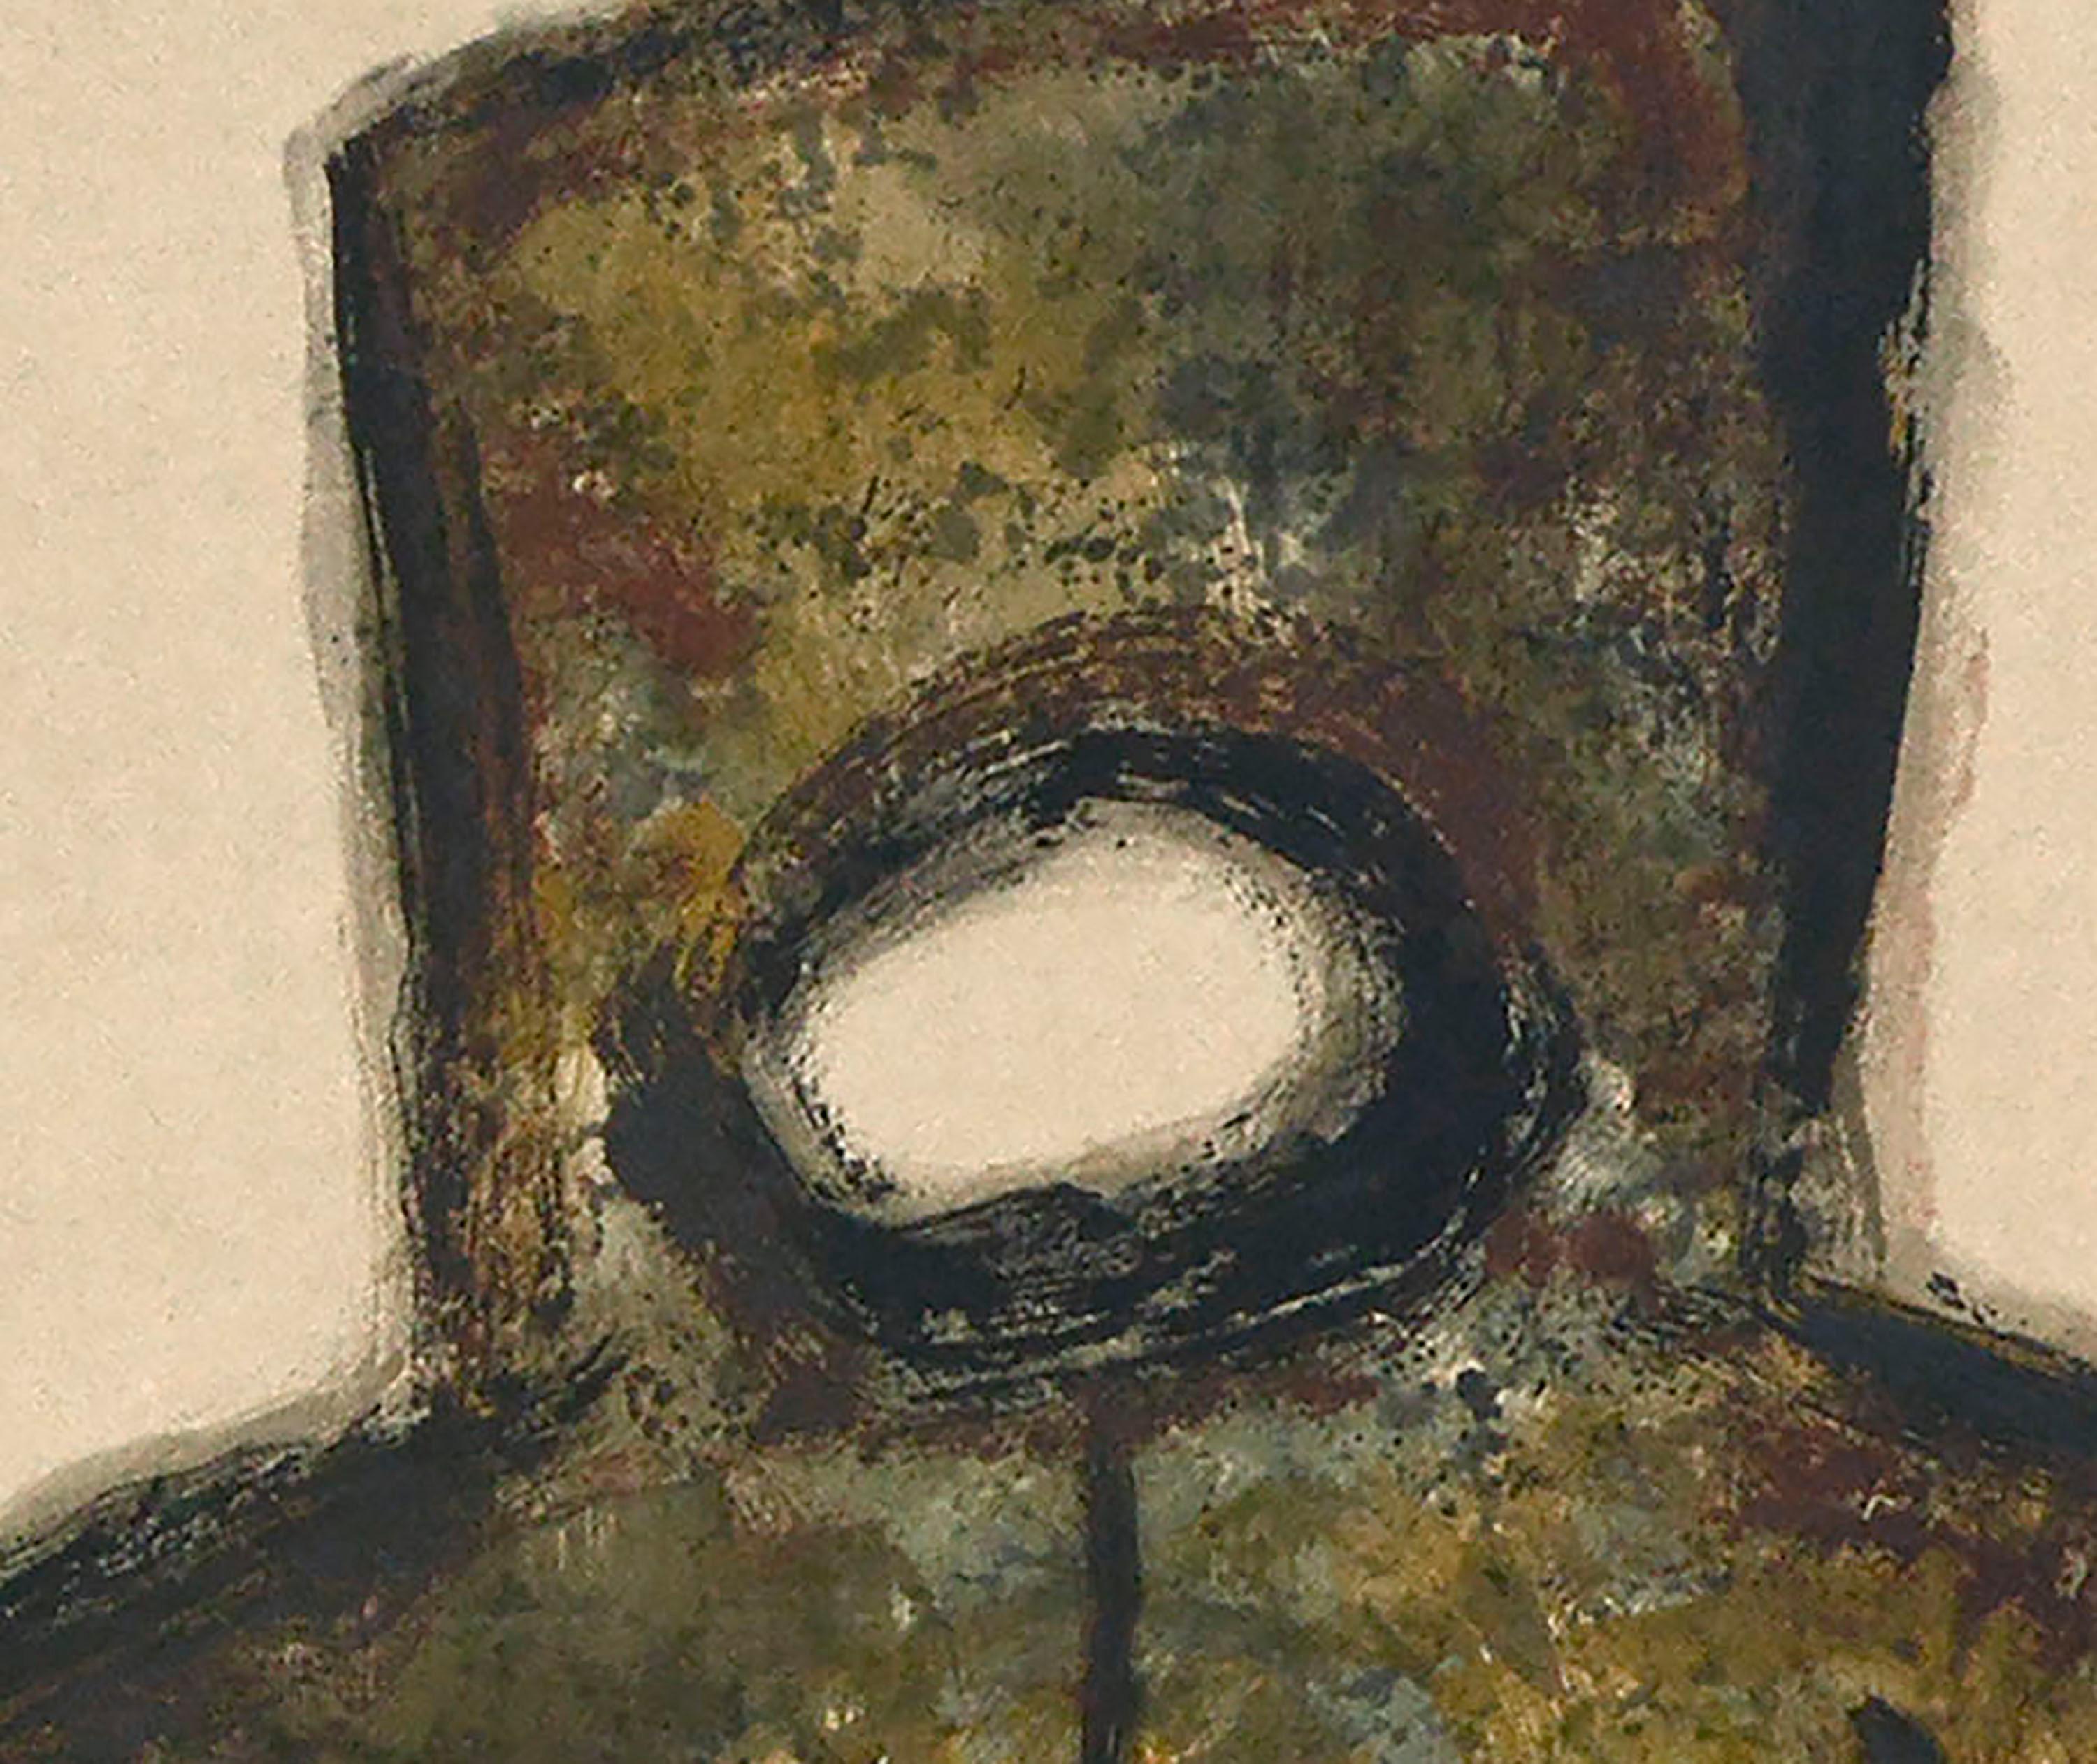 Figural abstract inspired by Chinese art and calligraphy featuring a large totem-like form in textured earth tones with black Chinese characters in bold, black brushstrokes by Anna Wu Weakland (Chinese-American, 1924-2014). Signed lower right with